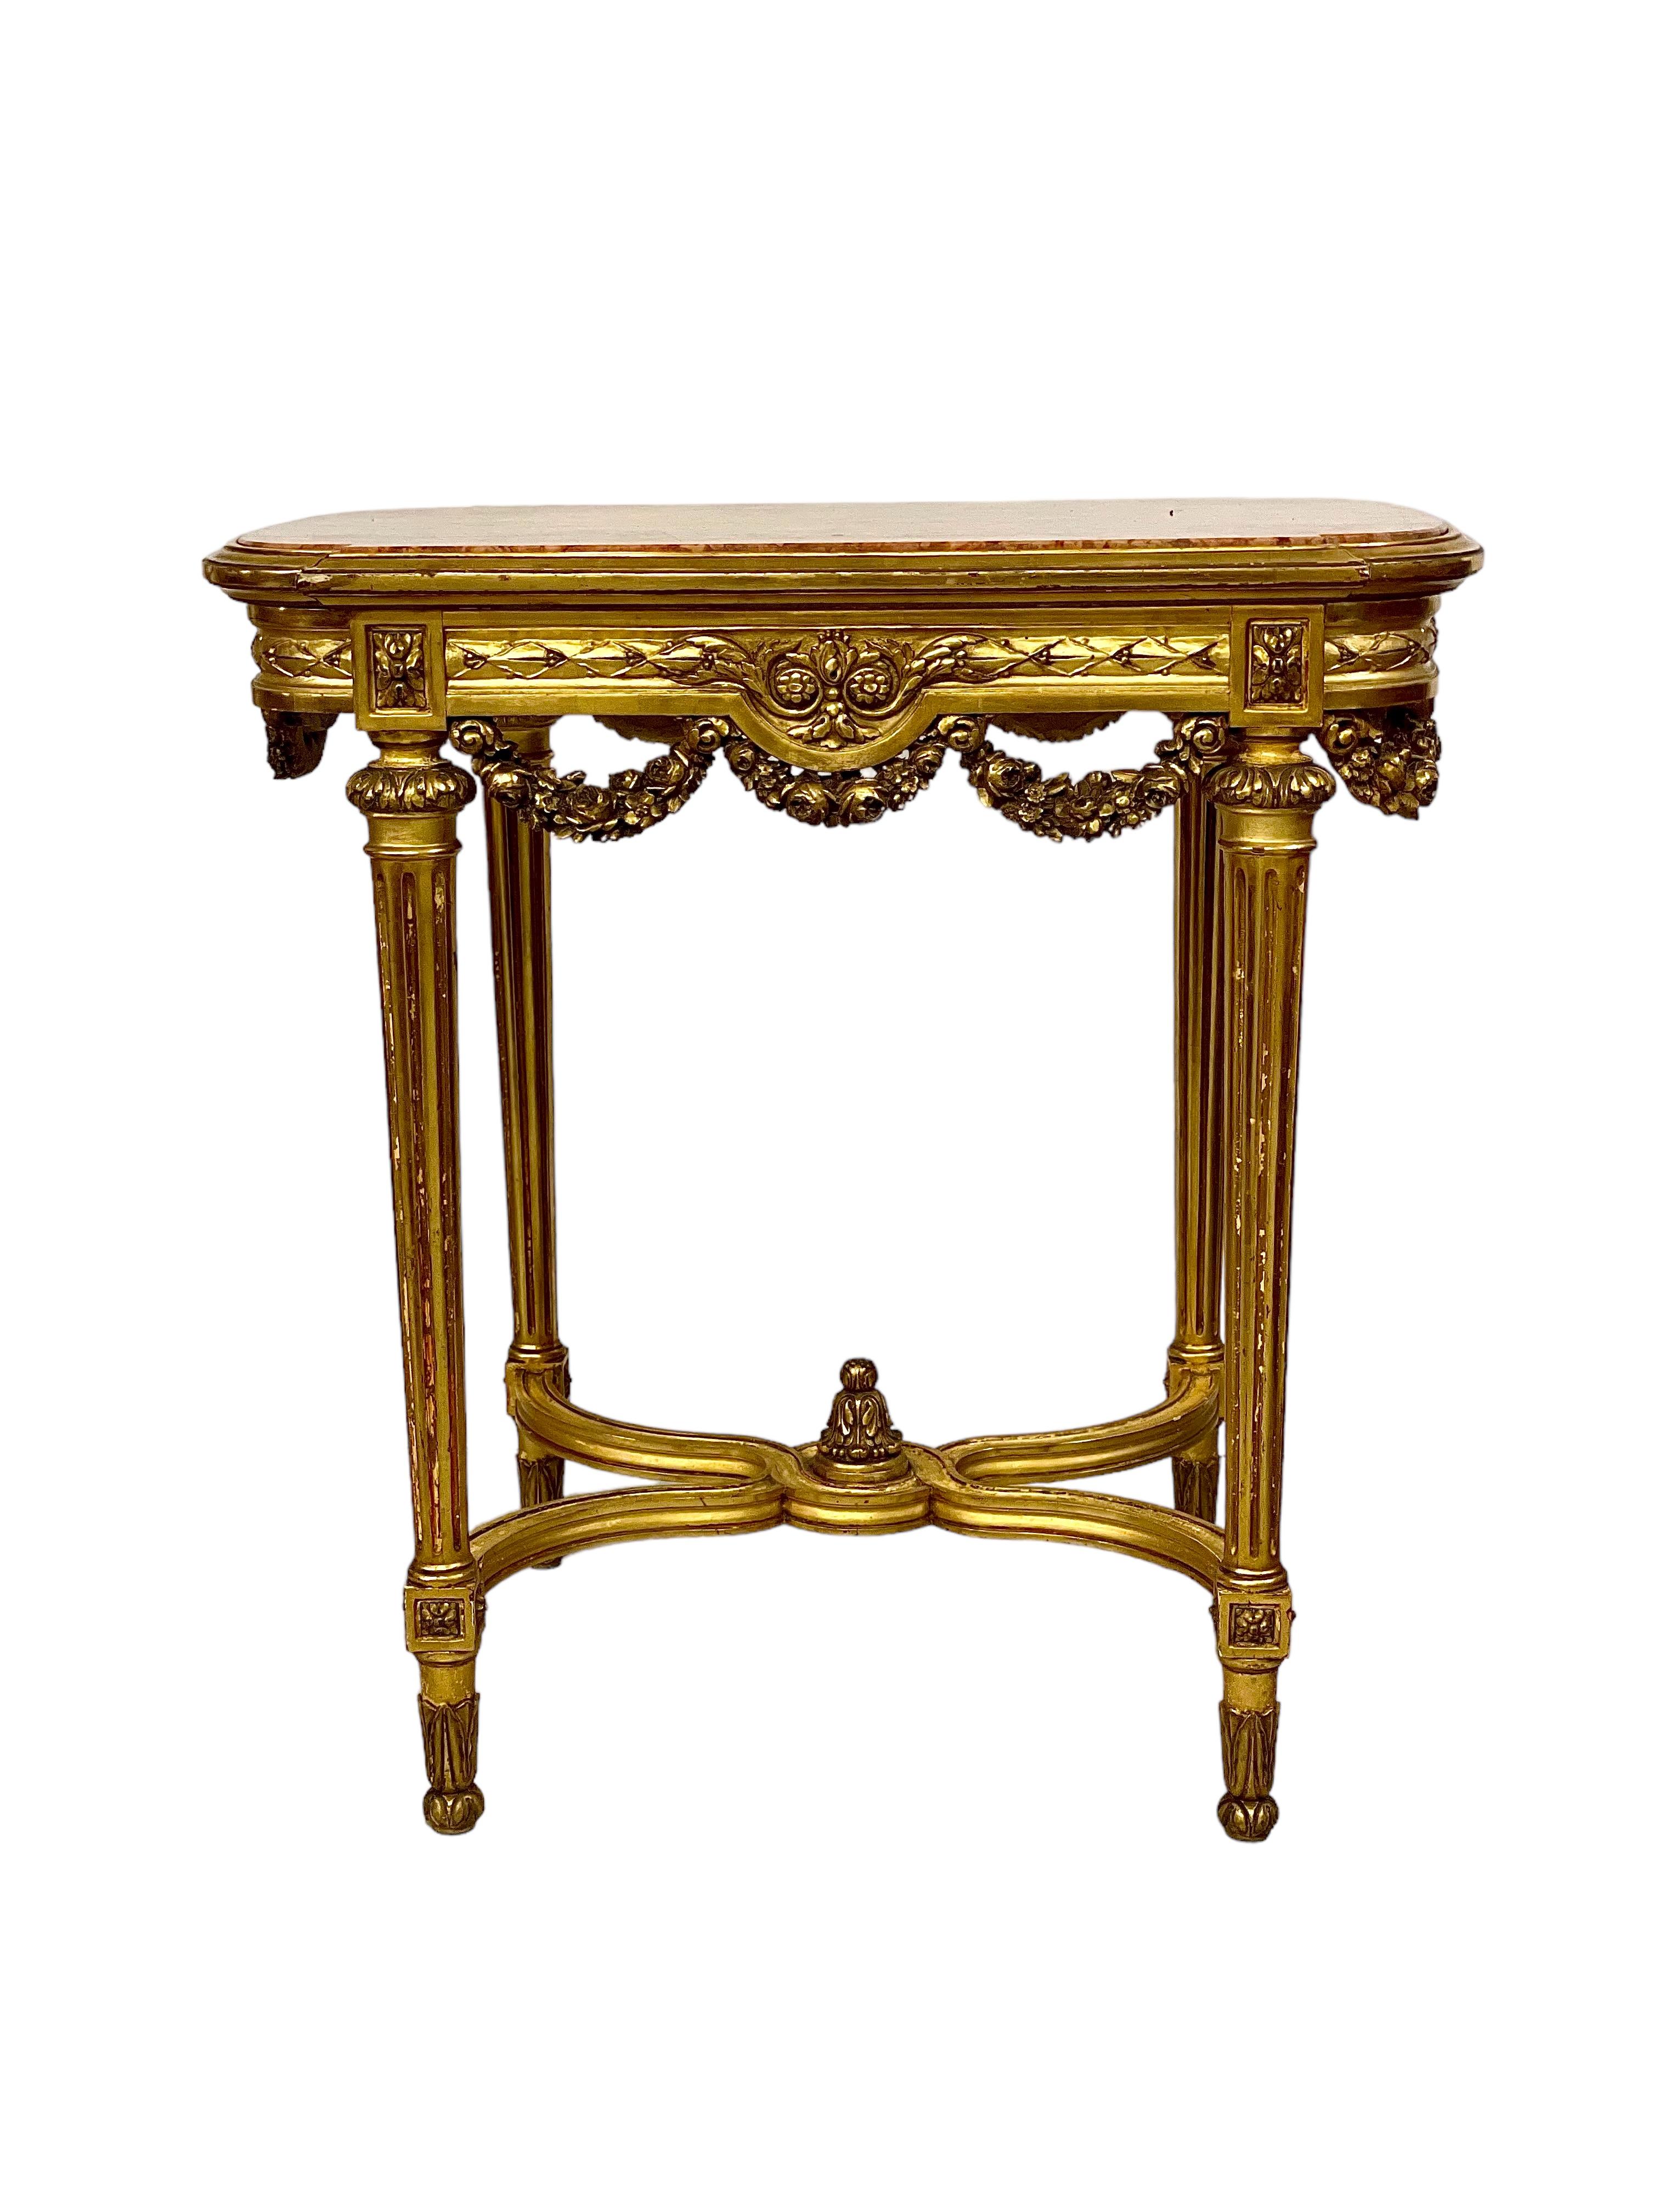 A pretty little Louis XVI style centre table (or 'Table de Milieu') in carved, moulded and gilded wood, and ornately decorated around and below its apron with swags of flowers and carved motifs. A curved X stretcher joins the four fluted and tapered